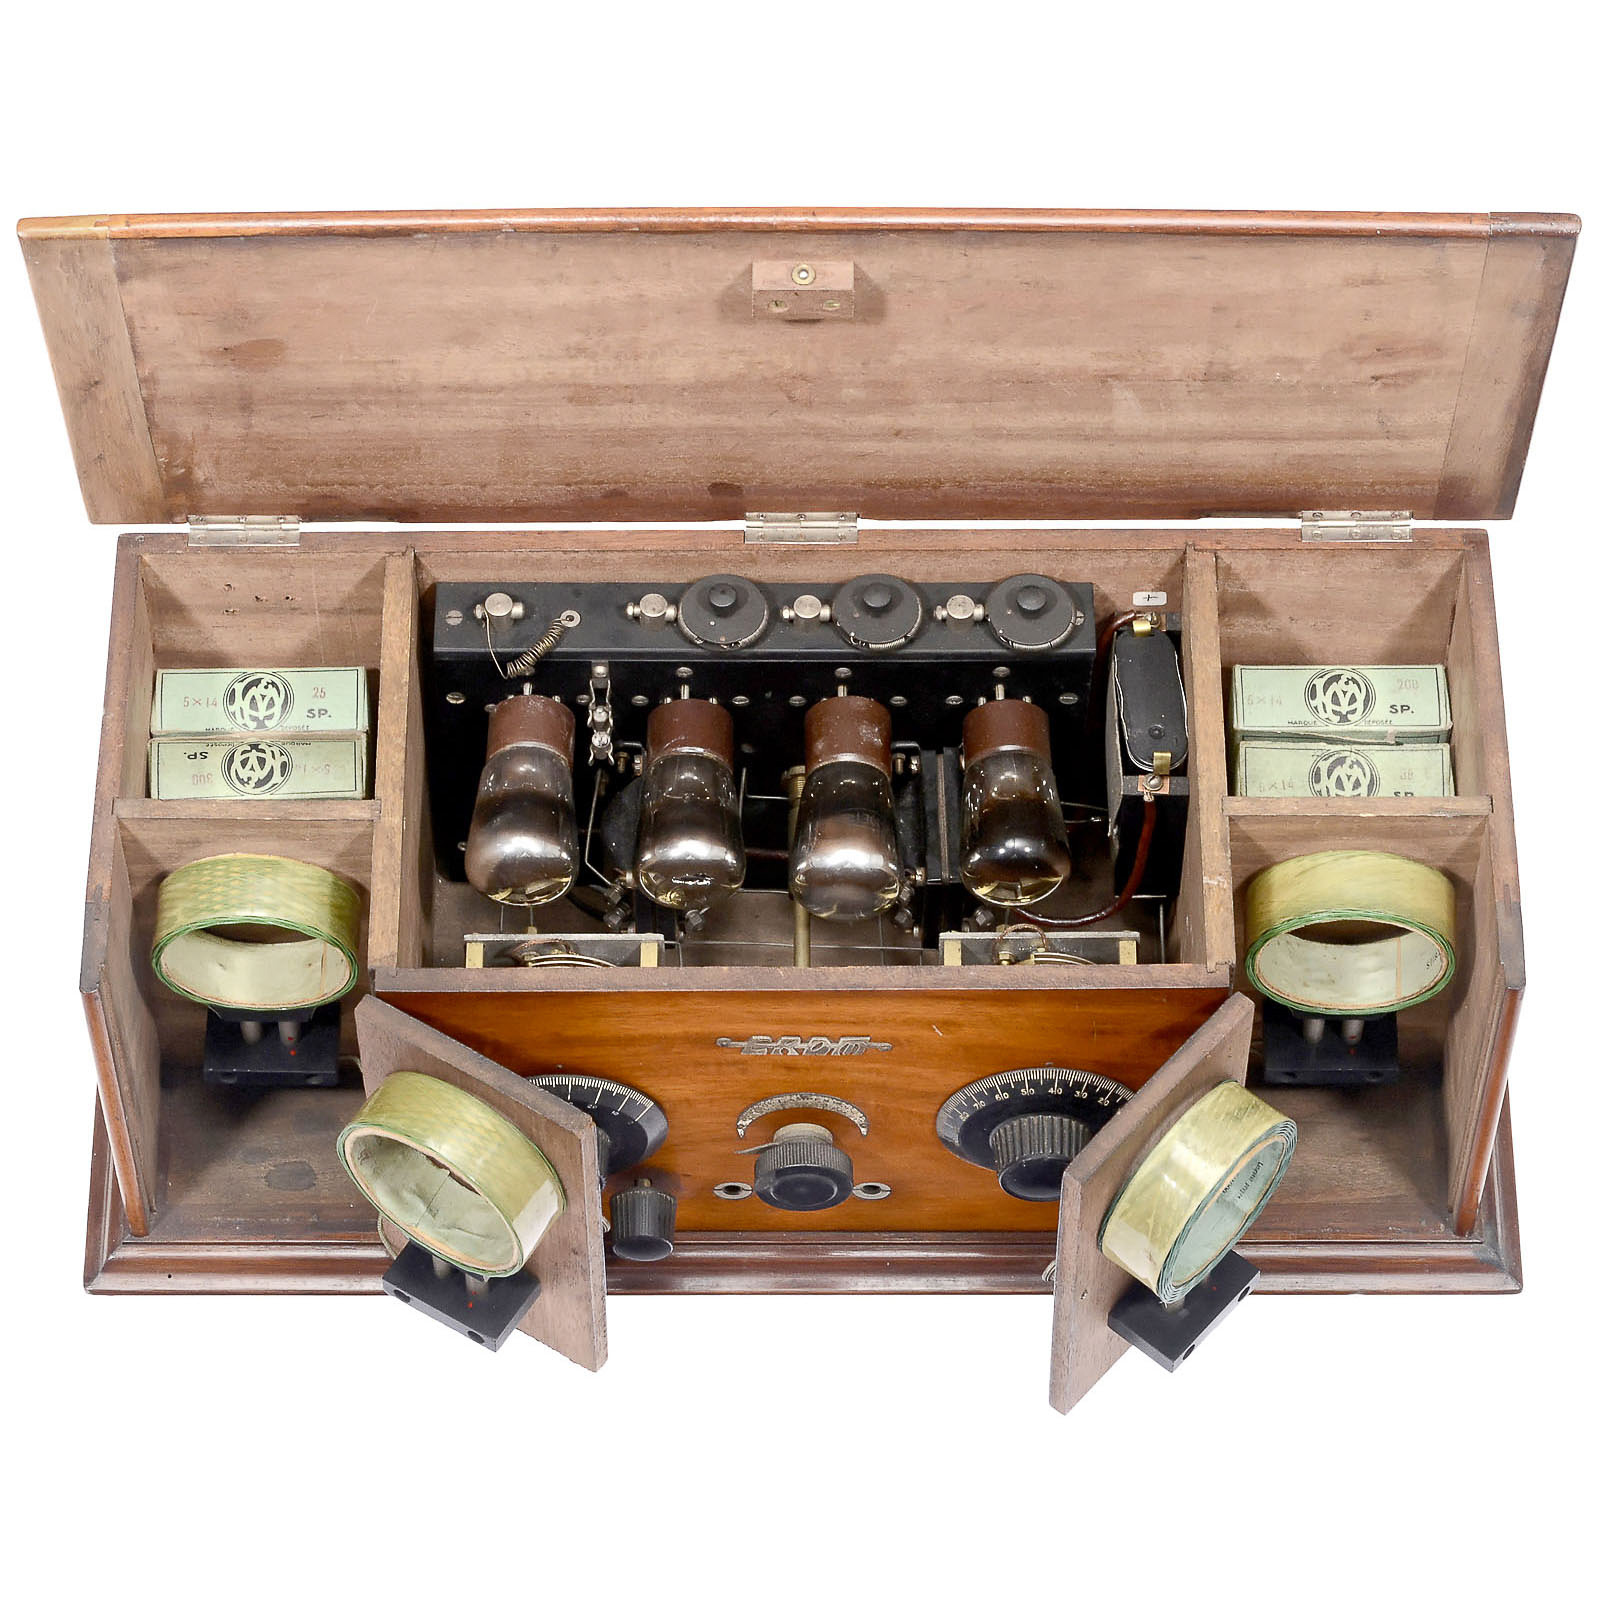 French ERDM Radio, 1924  4-valve battery receiver, MW, wooden case with 2 doors, 2 compartments with - Image 2 of 2